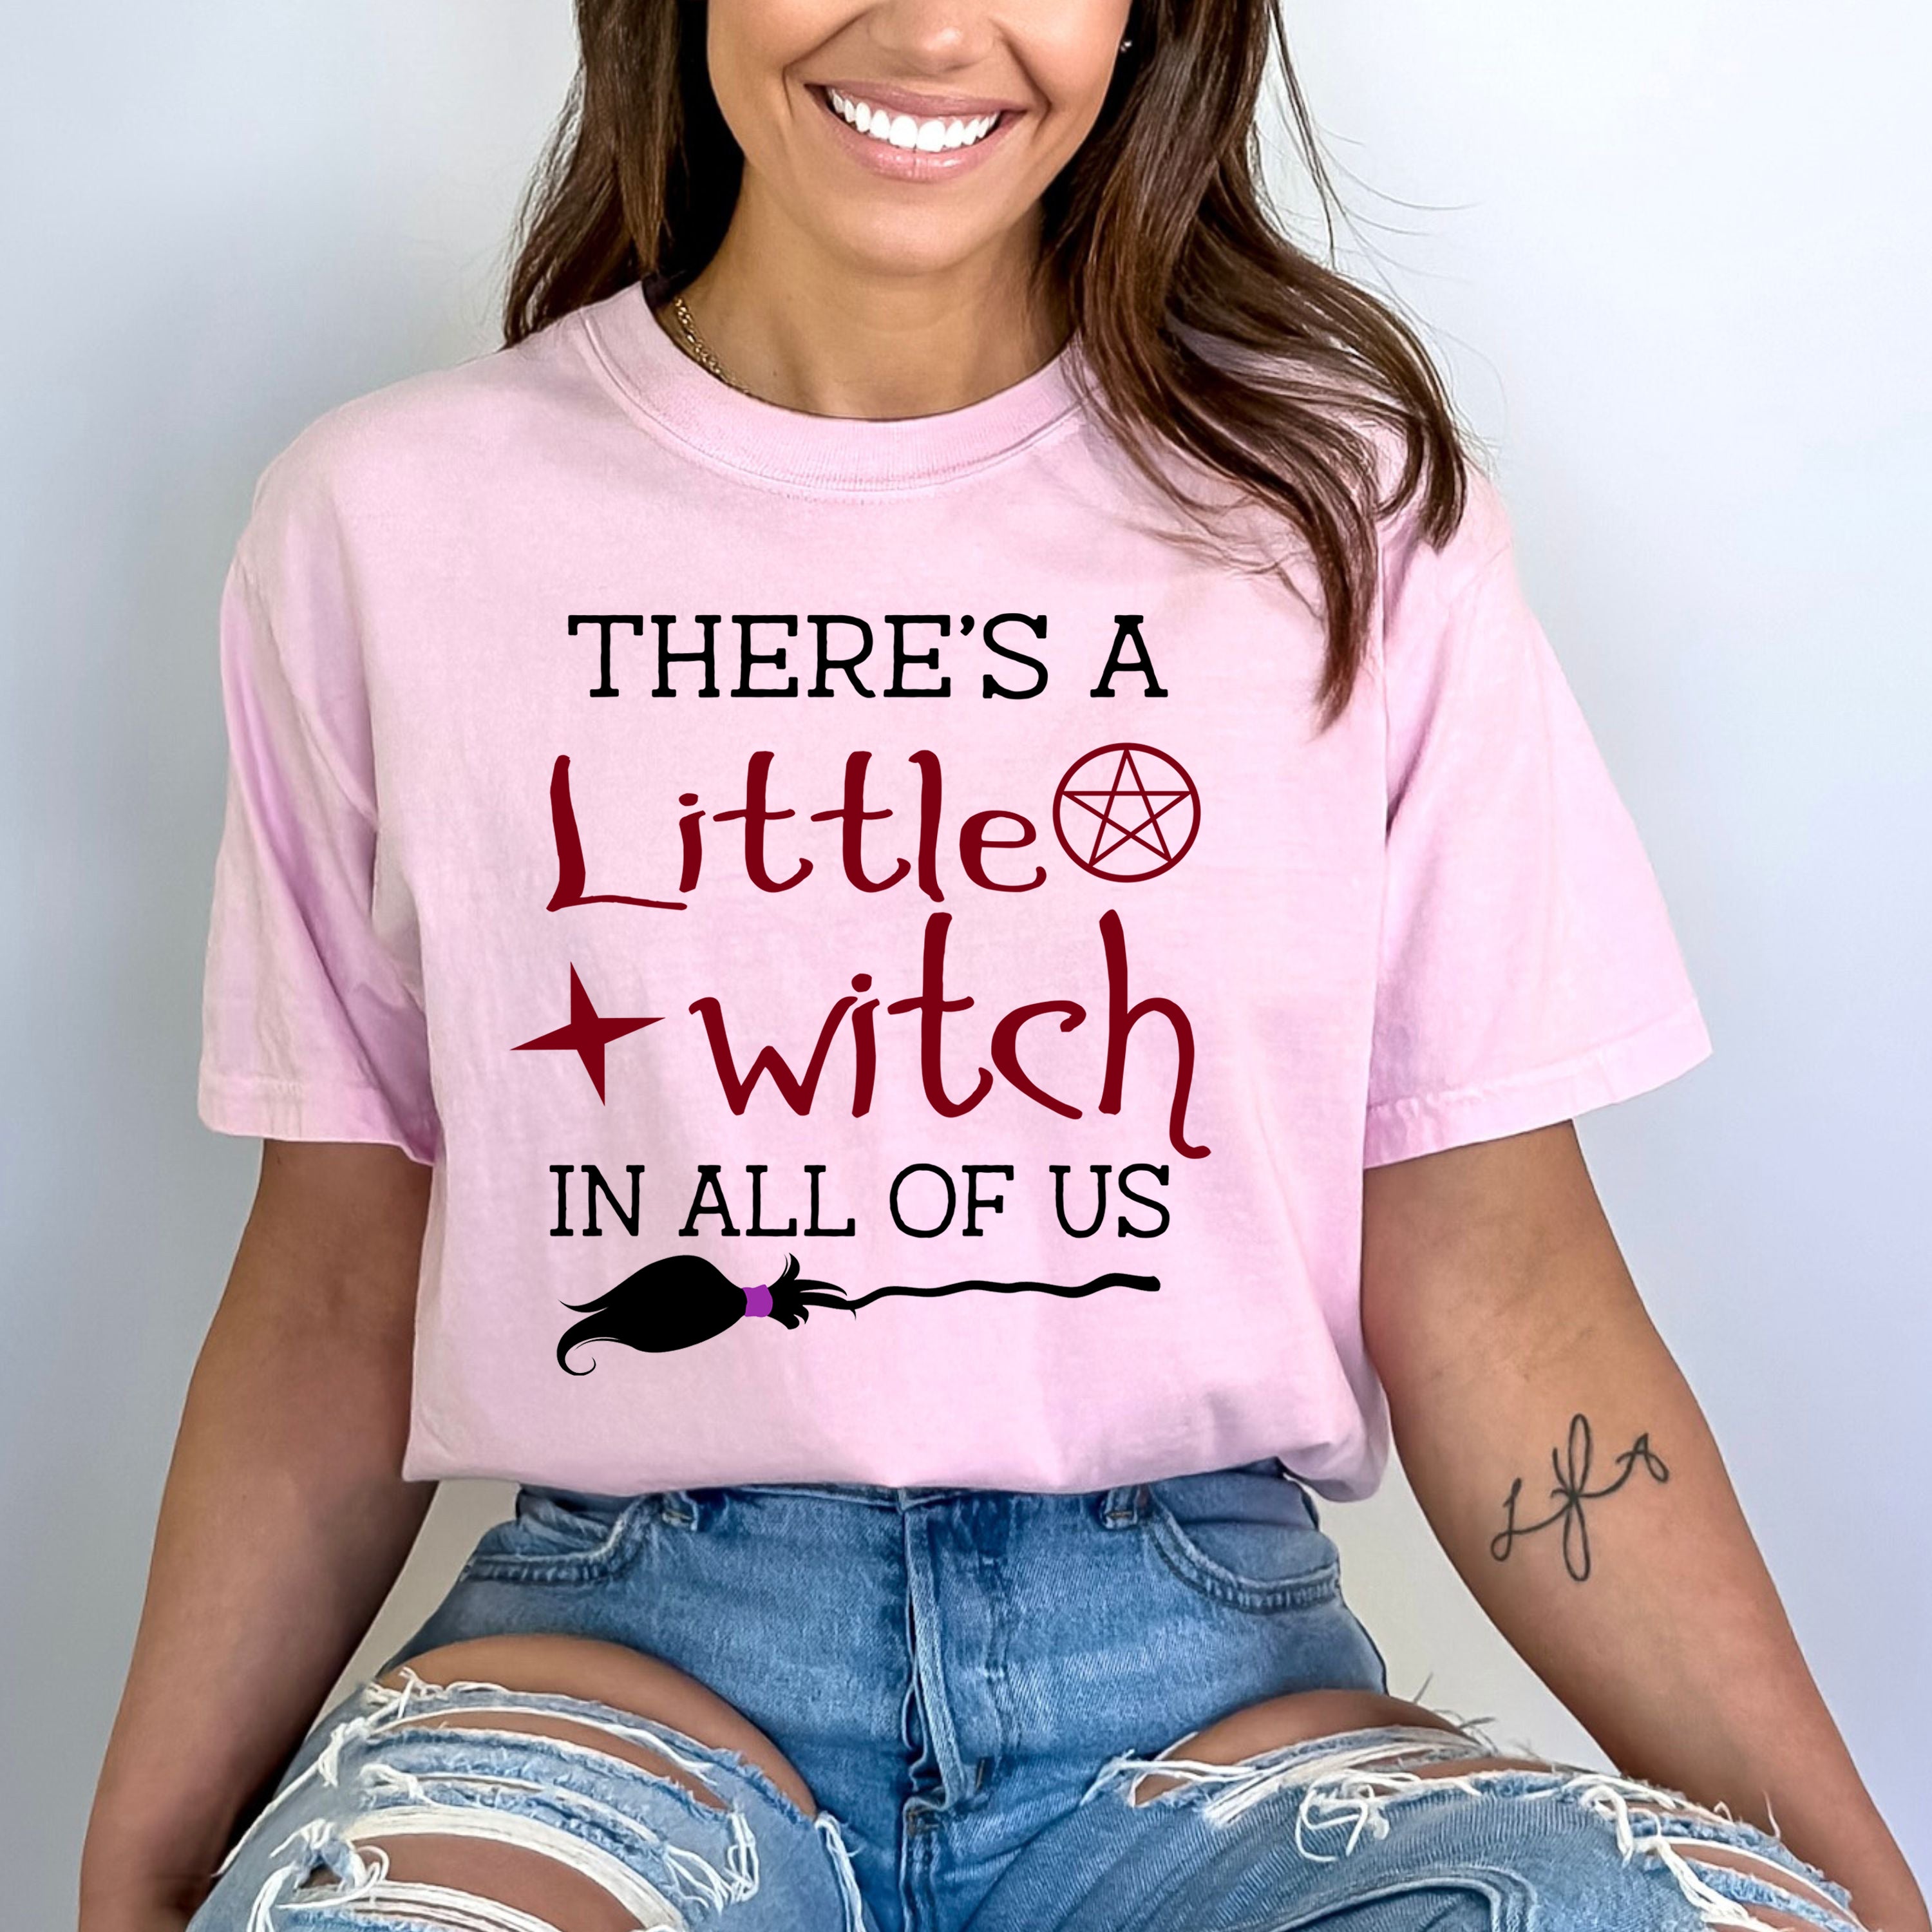 There's A Little Witch - Bella Canvas